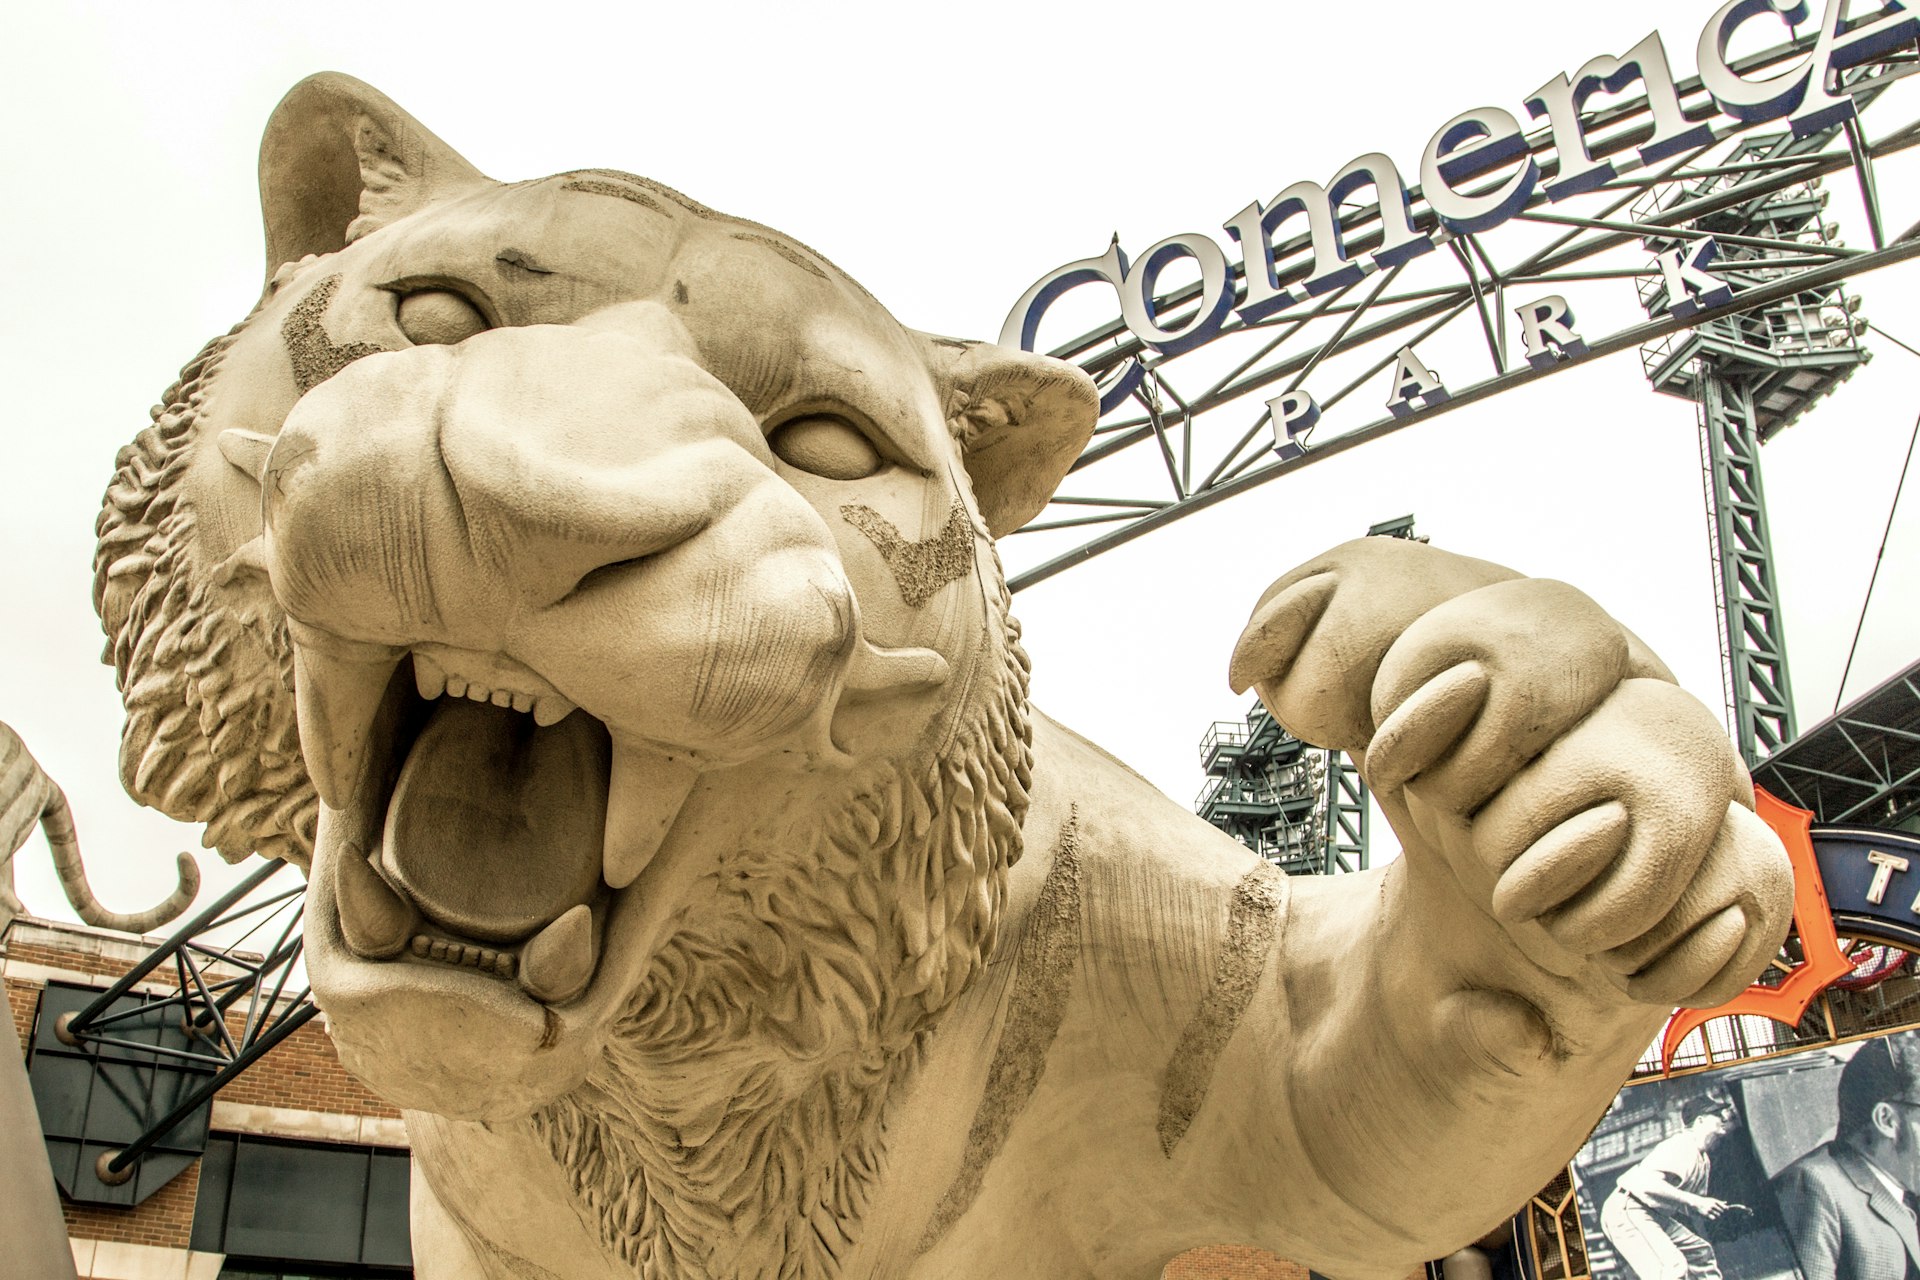 10 ideas for family-friendly fun in Detroit - Lonely Planet